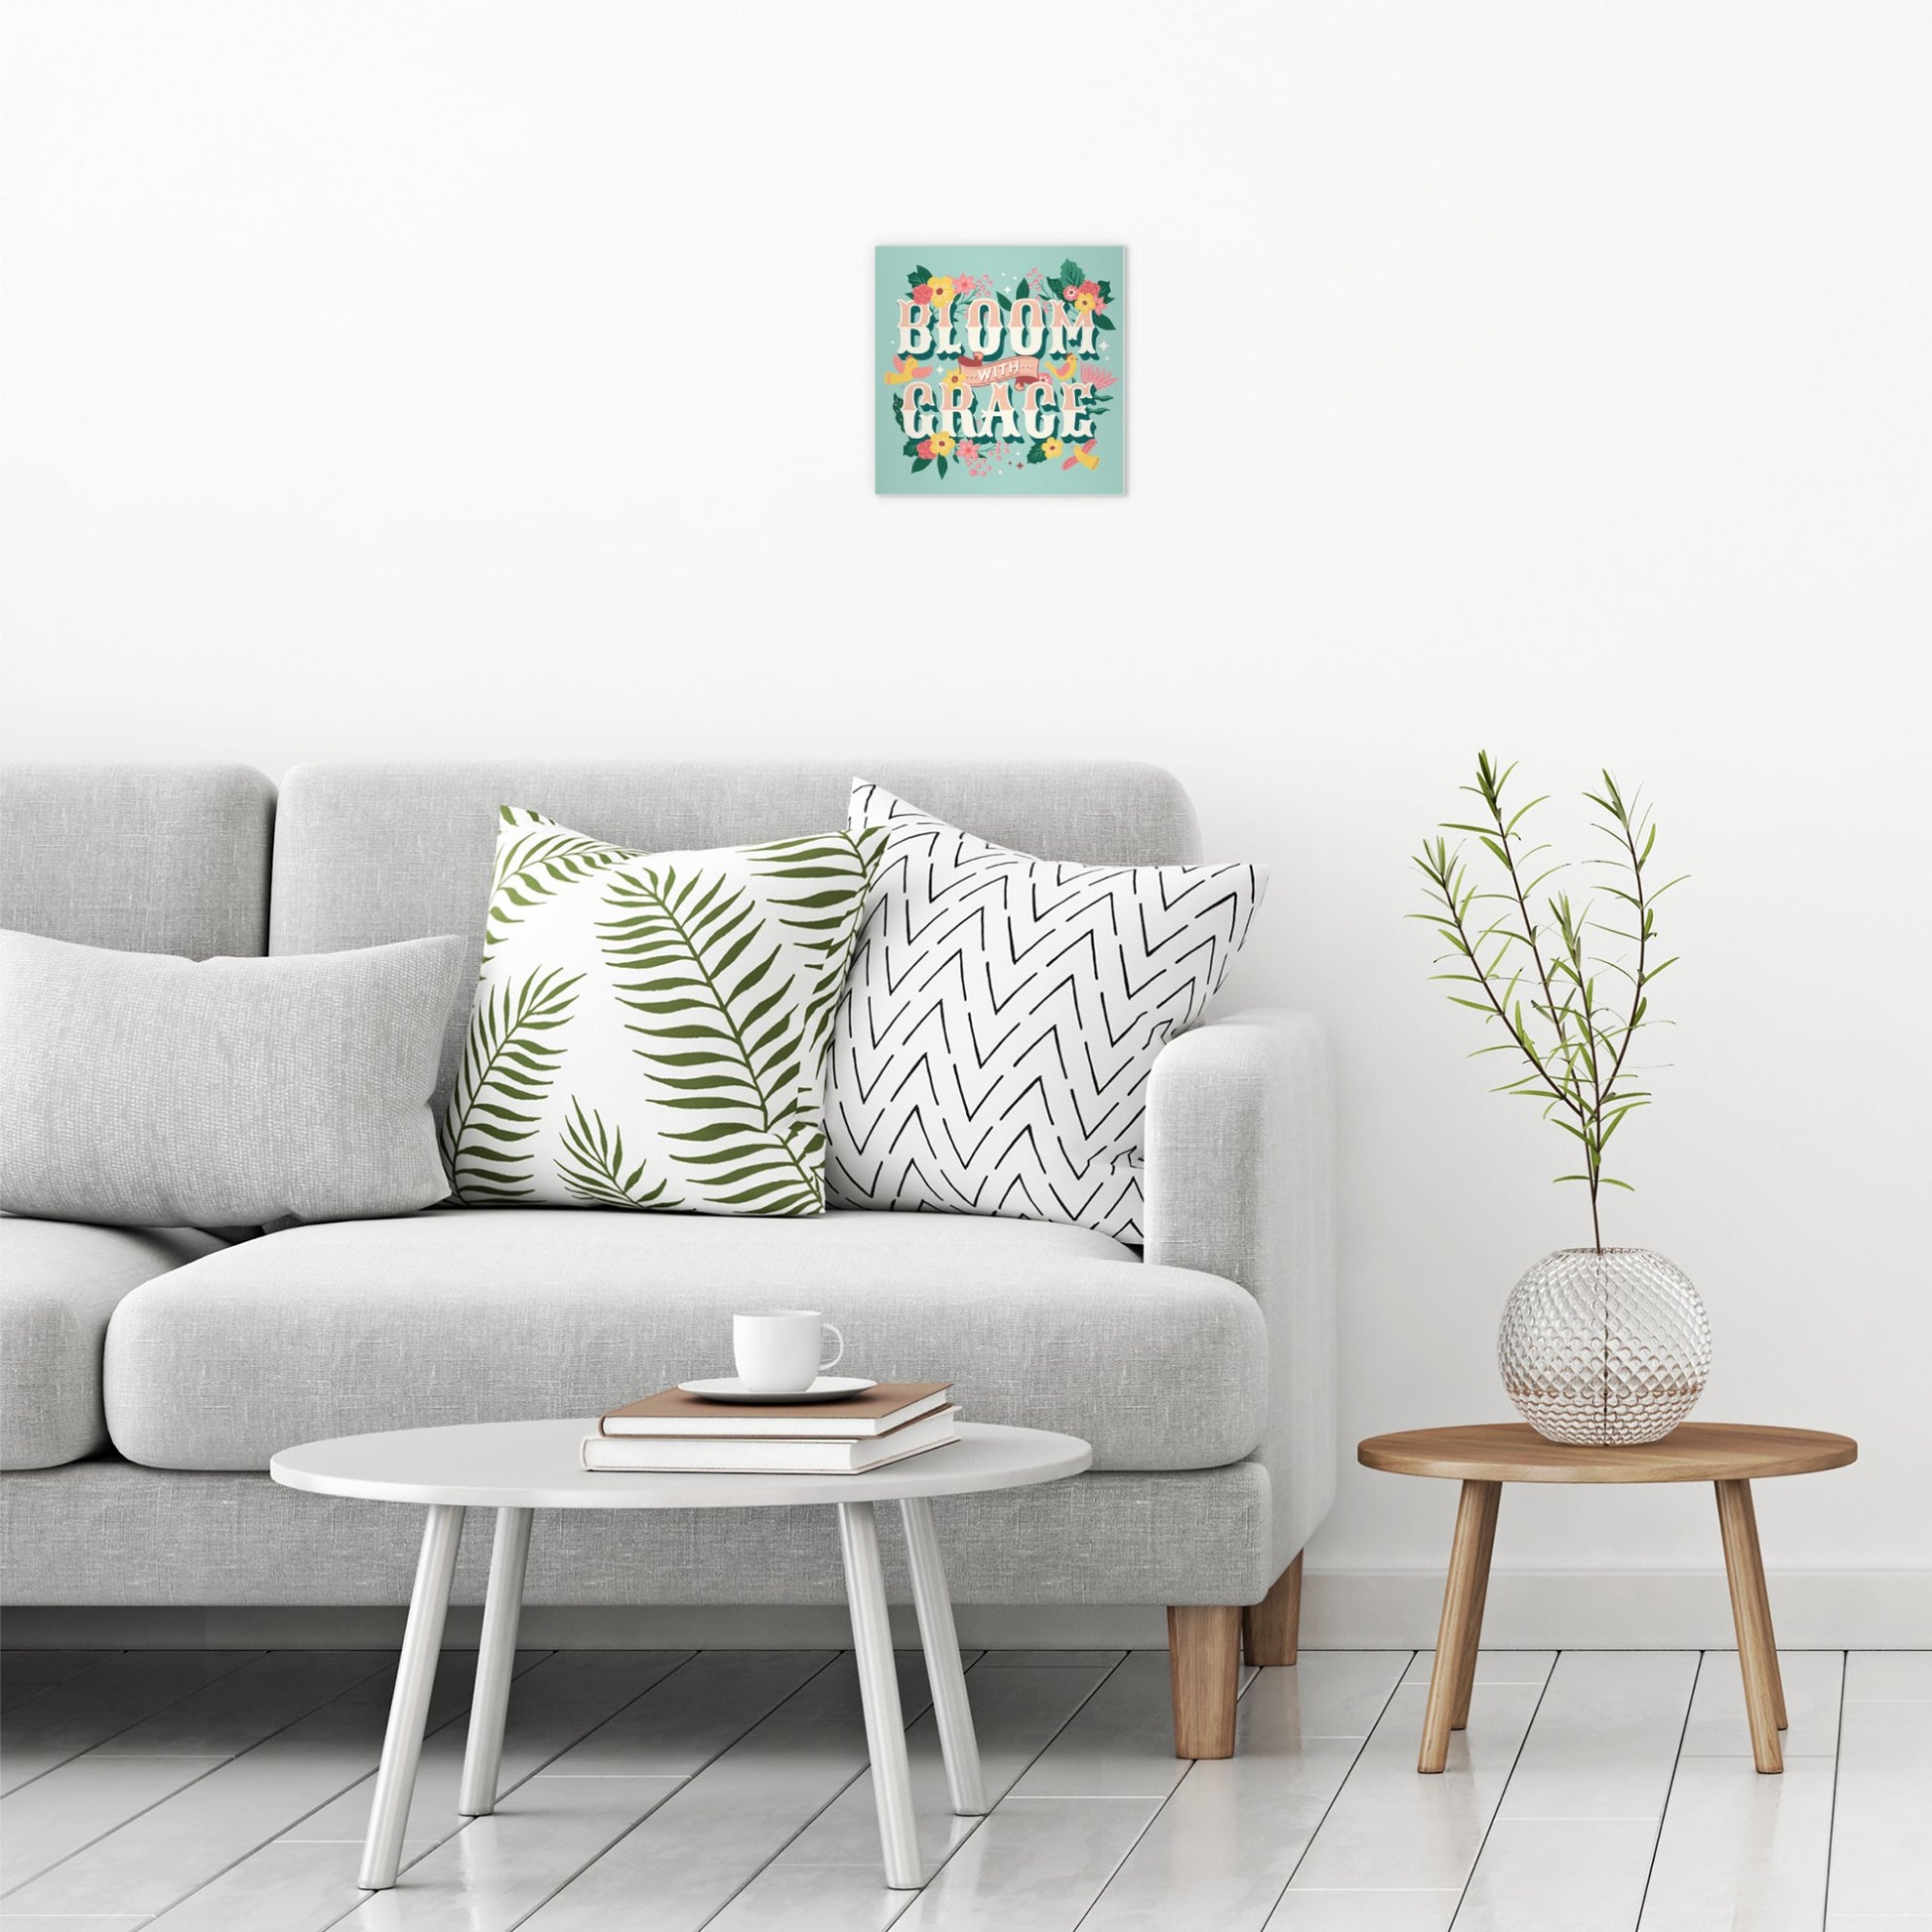 A contemporary modern room view showing a small size metal art poster display plate with printed design of a Bloom with Grace Inspirational Quote